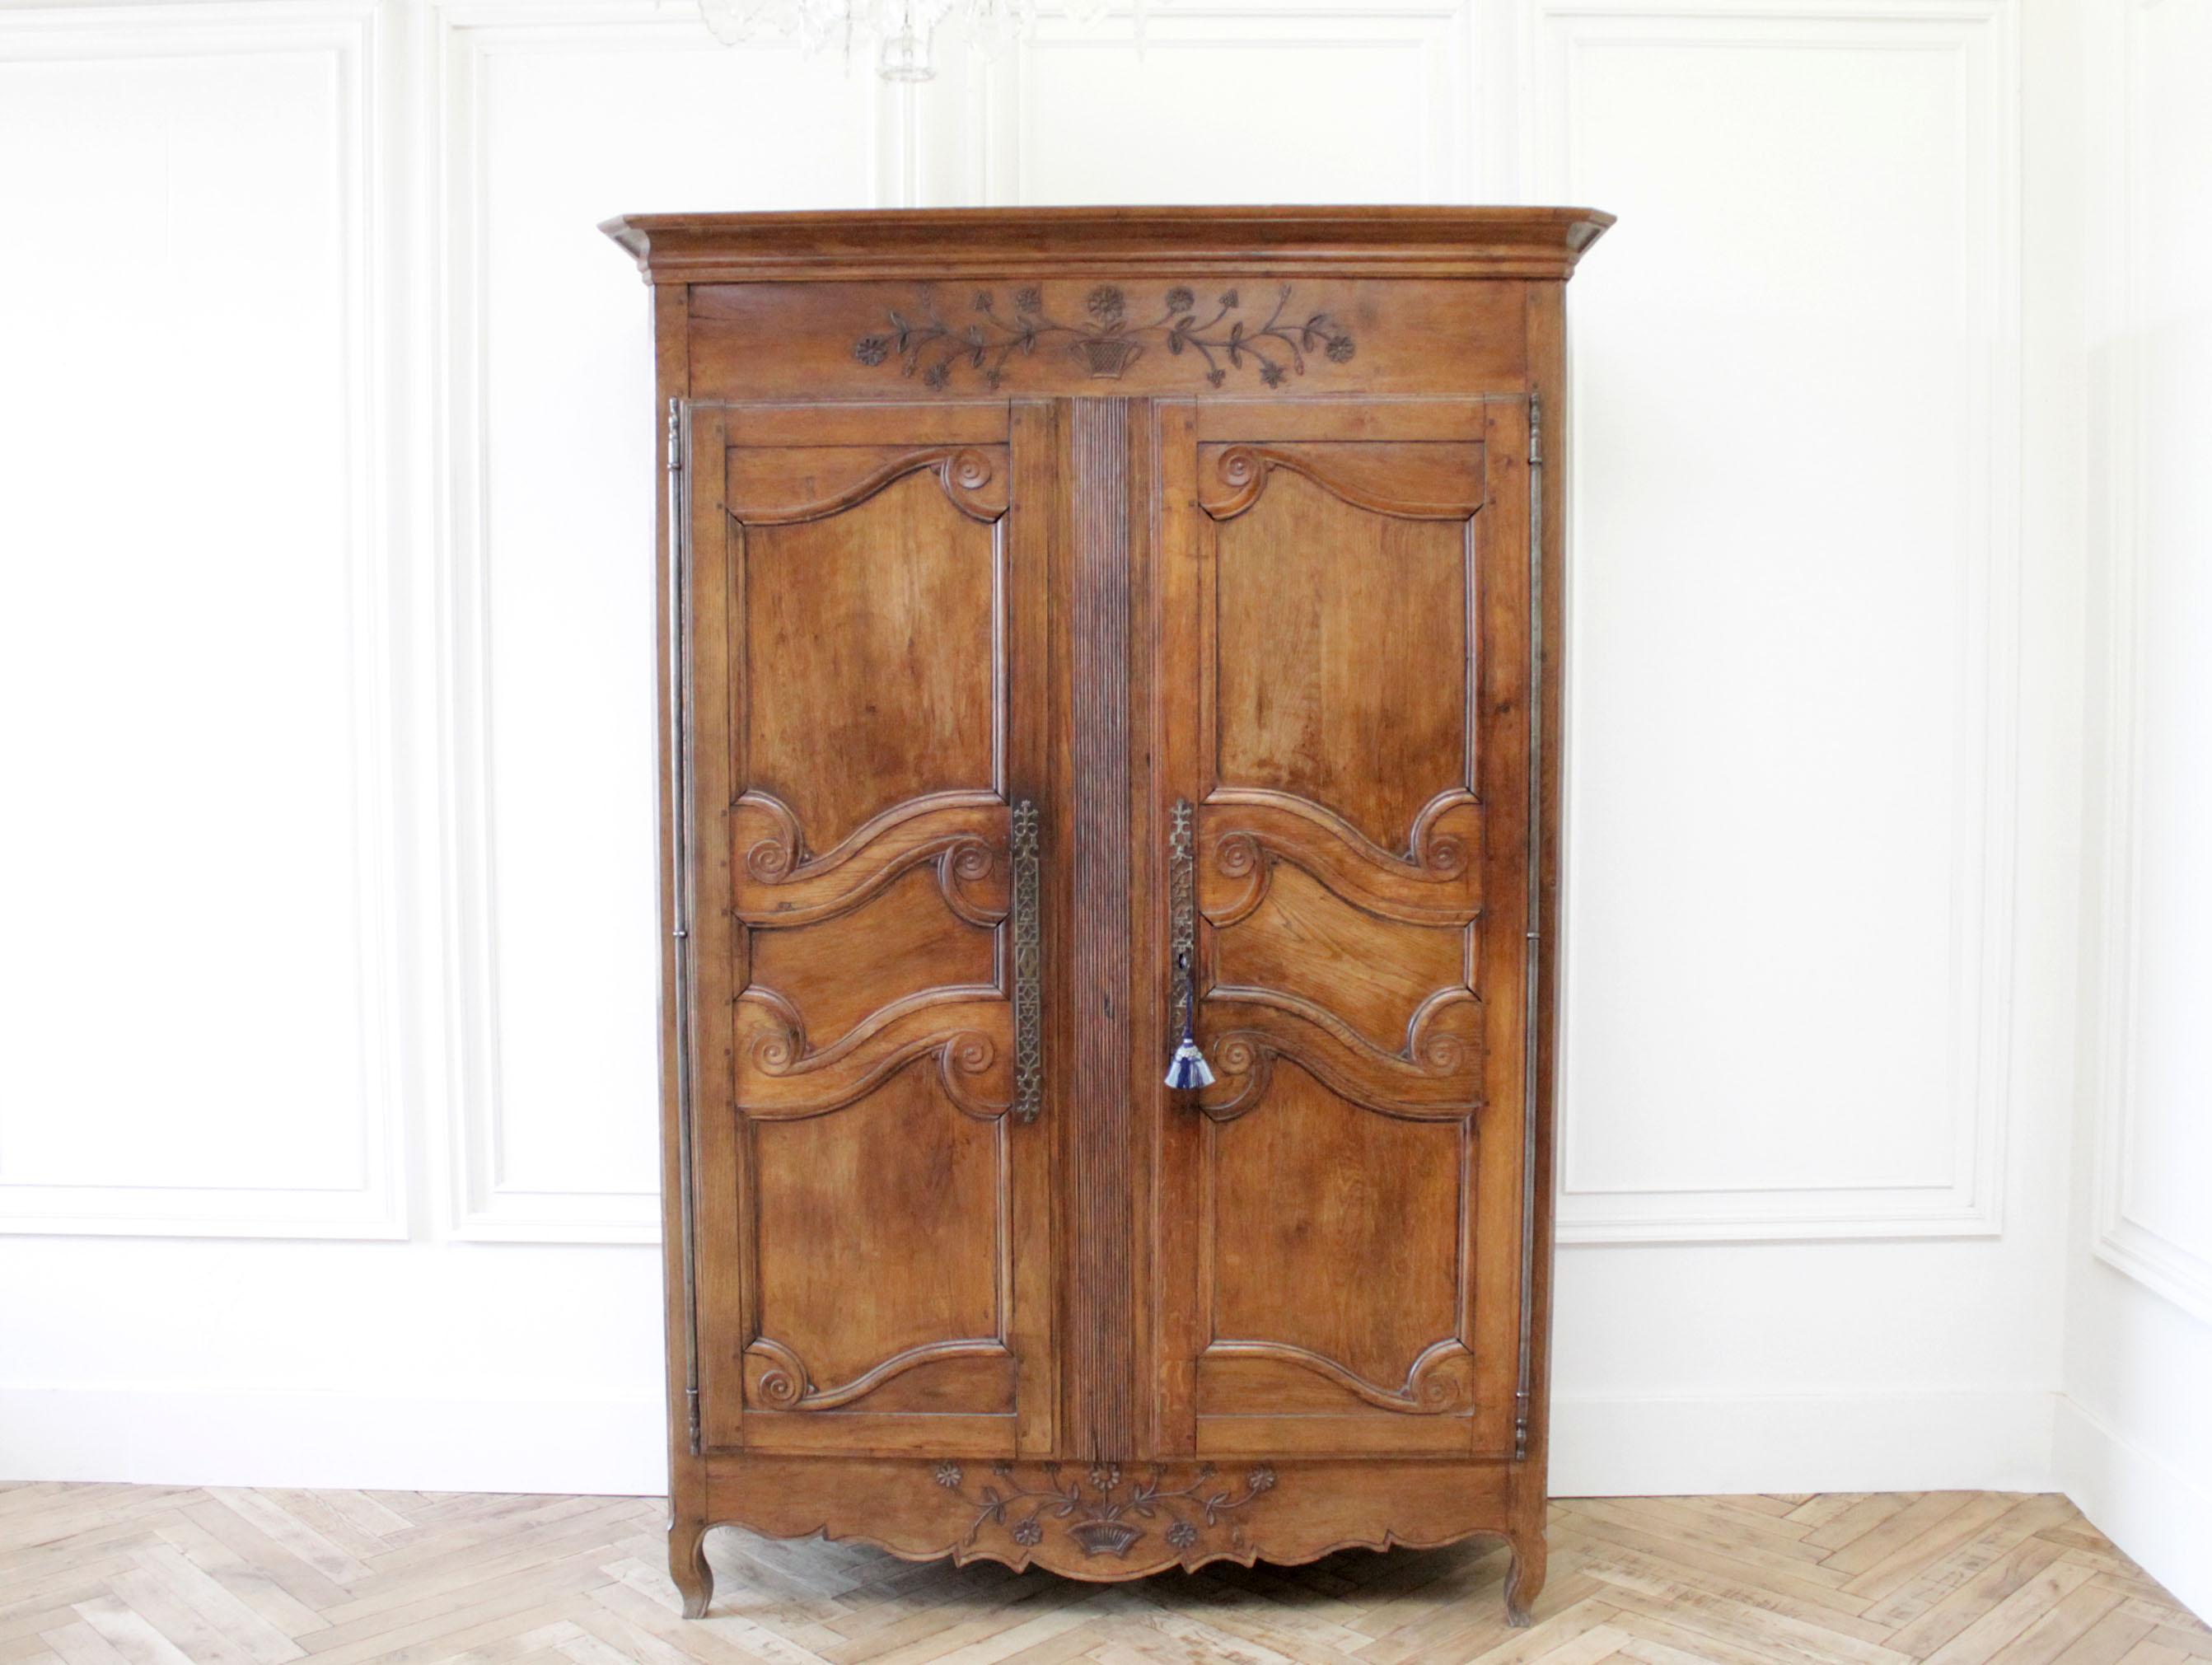 19th century carved walnut French Provincial armoire cabinet
Double doors with original working locking key.
Does not come apart. Doors lift off easily.
Solid and sturdy great storage.
Measures: 56